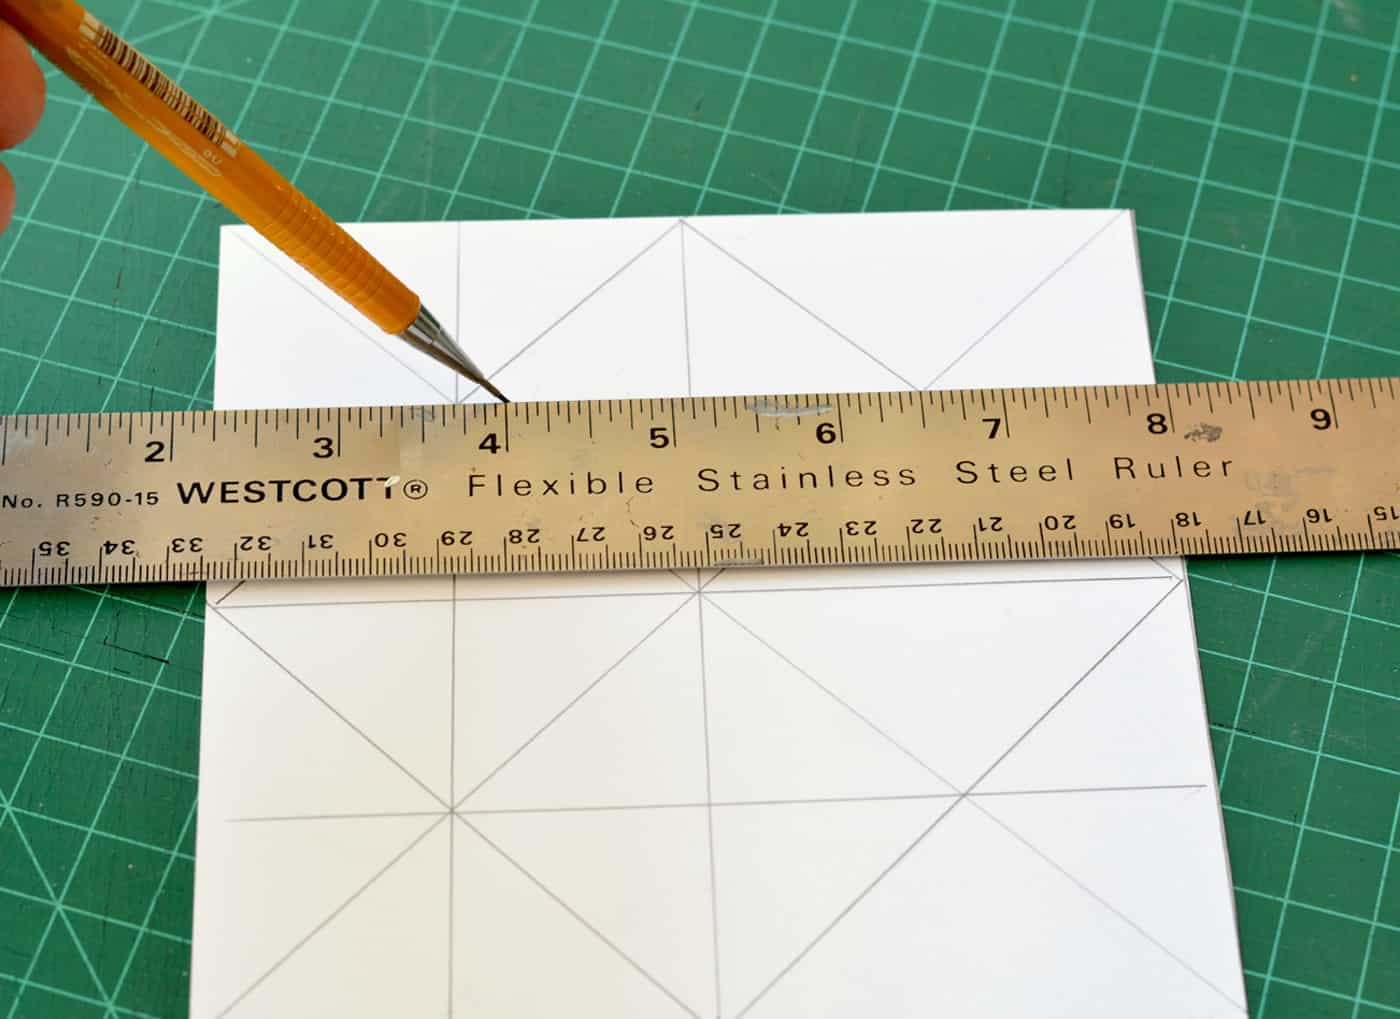 Making a grid on a piece of paper with a pencil and a steel ruler